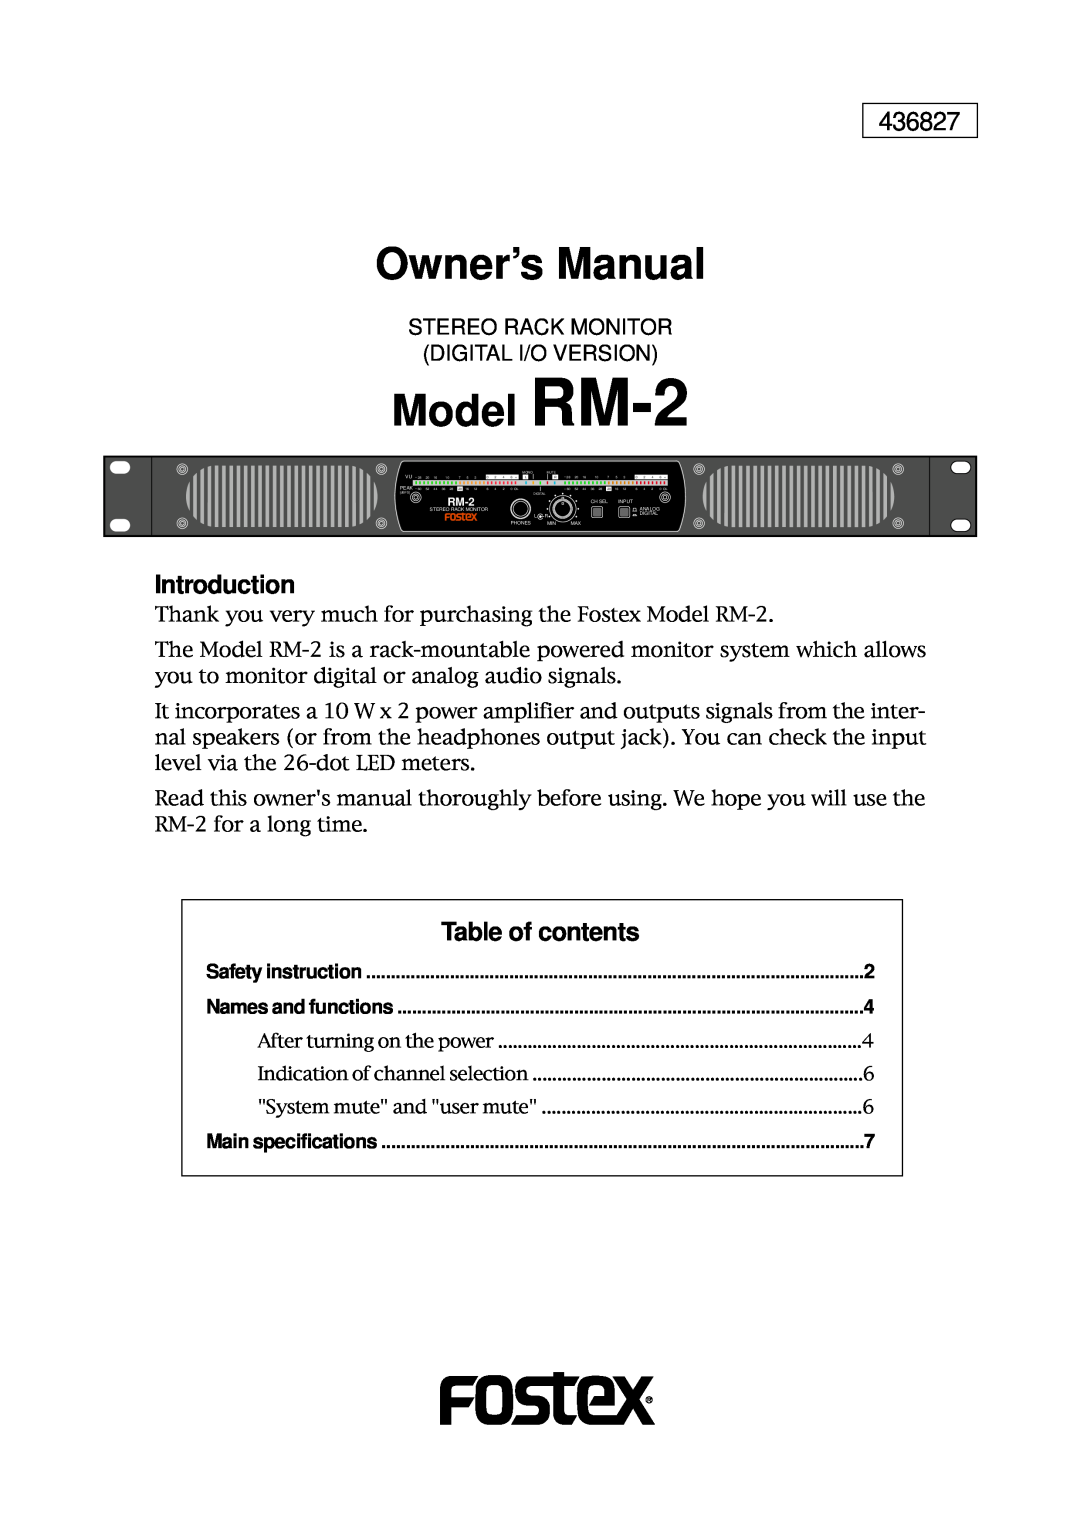 Fostex owner manual Stereo Rack Monitor Digital I/O Version, Model RM-2, 436827, Introduction, Table of contents 